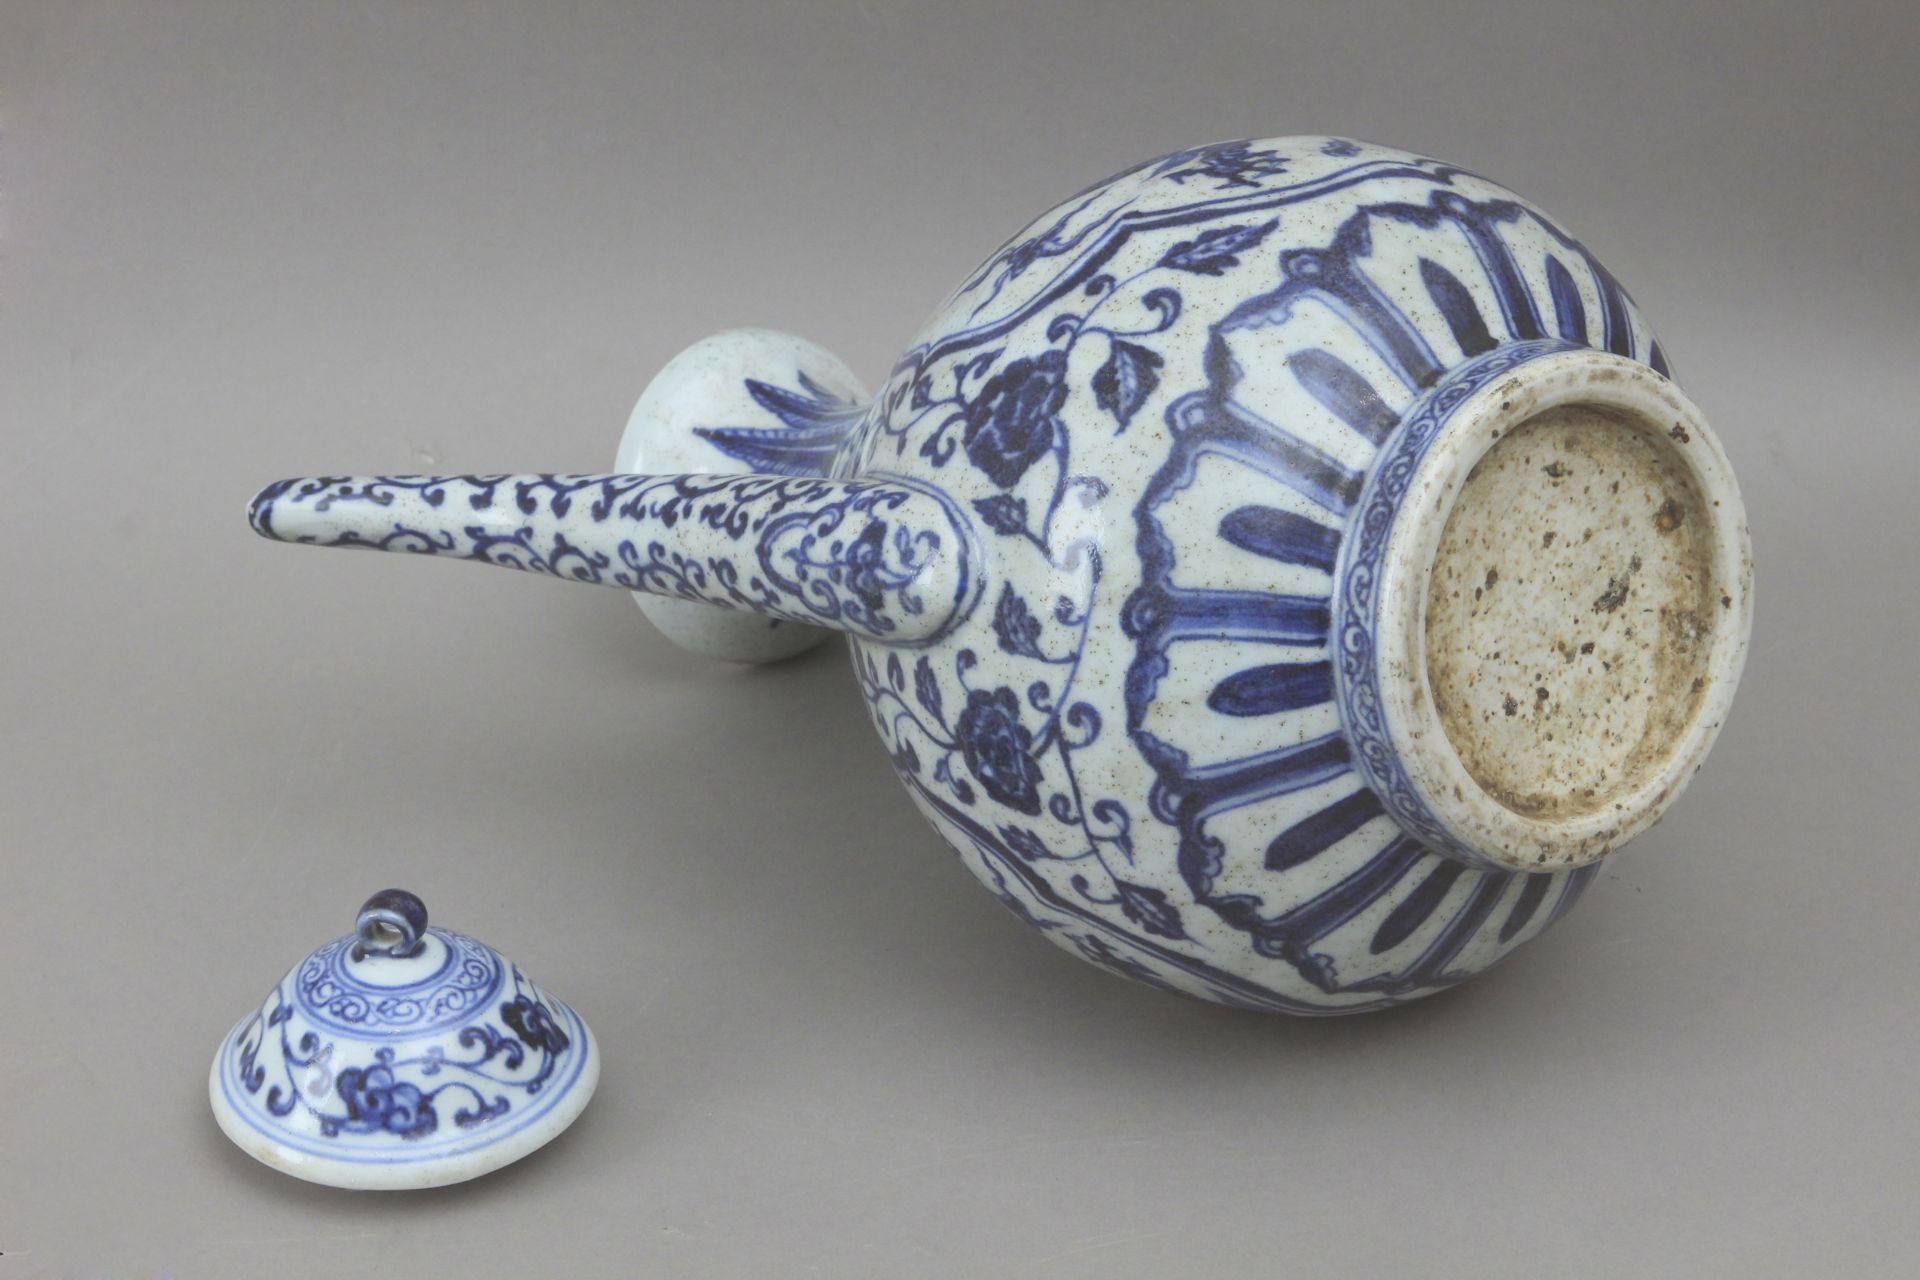 A 19th century Chinese wine pitcher from Qing dynasty - Image 3 of 4